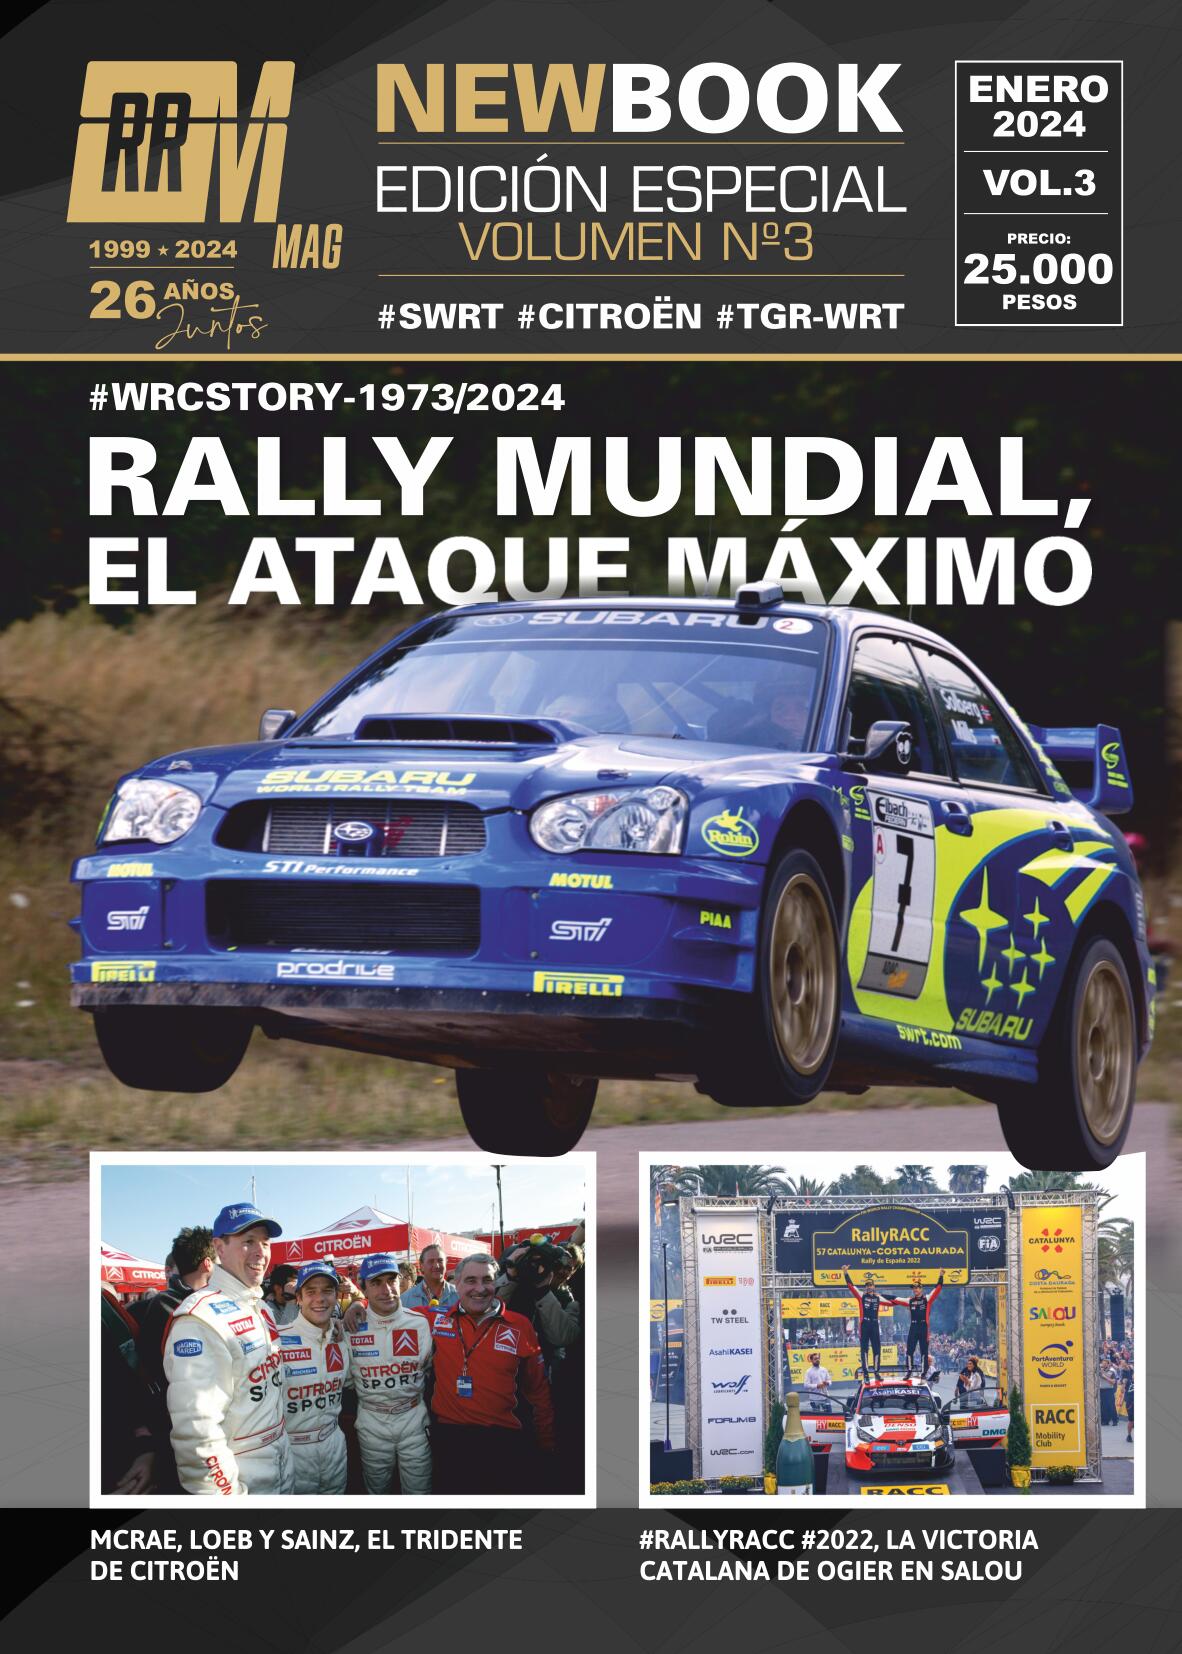 ▶️#RRRMWRCMAG #2024  🇦🇷🌍 🚗🏁🔝✨☀️ – THE RRM WRC MAG ONLINE STORE IS BORN IN #2024 🇦🇷🌍 🚗🏁🔝✨☀️